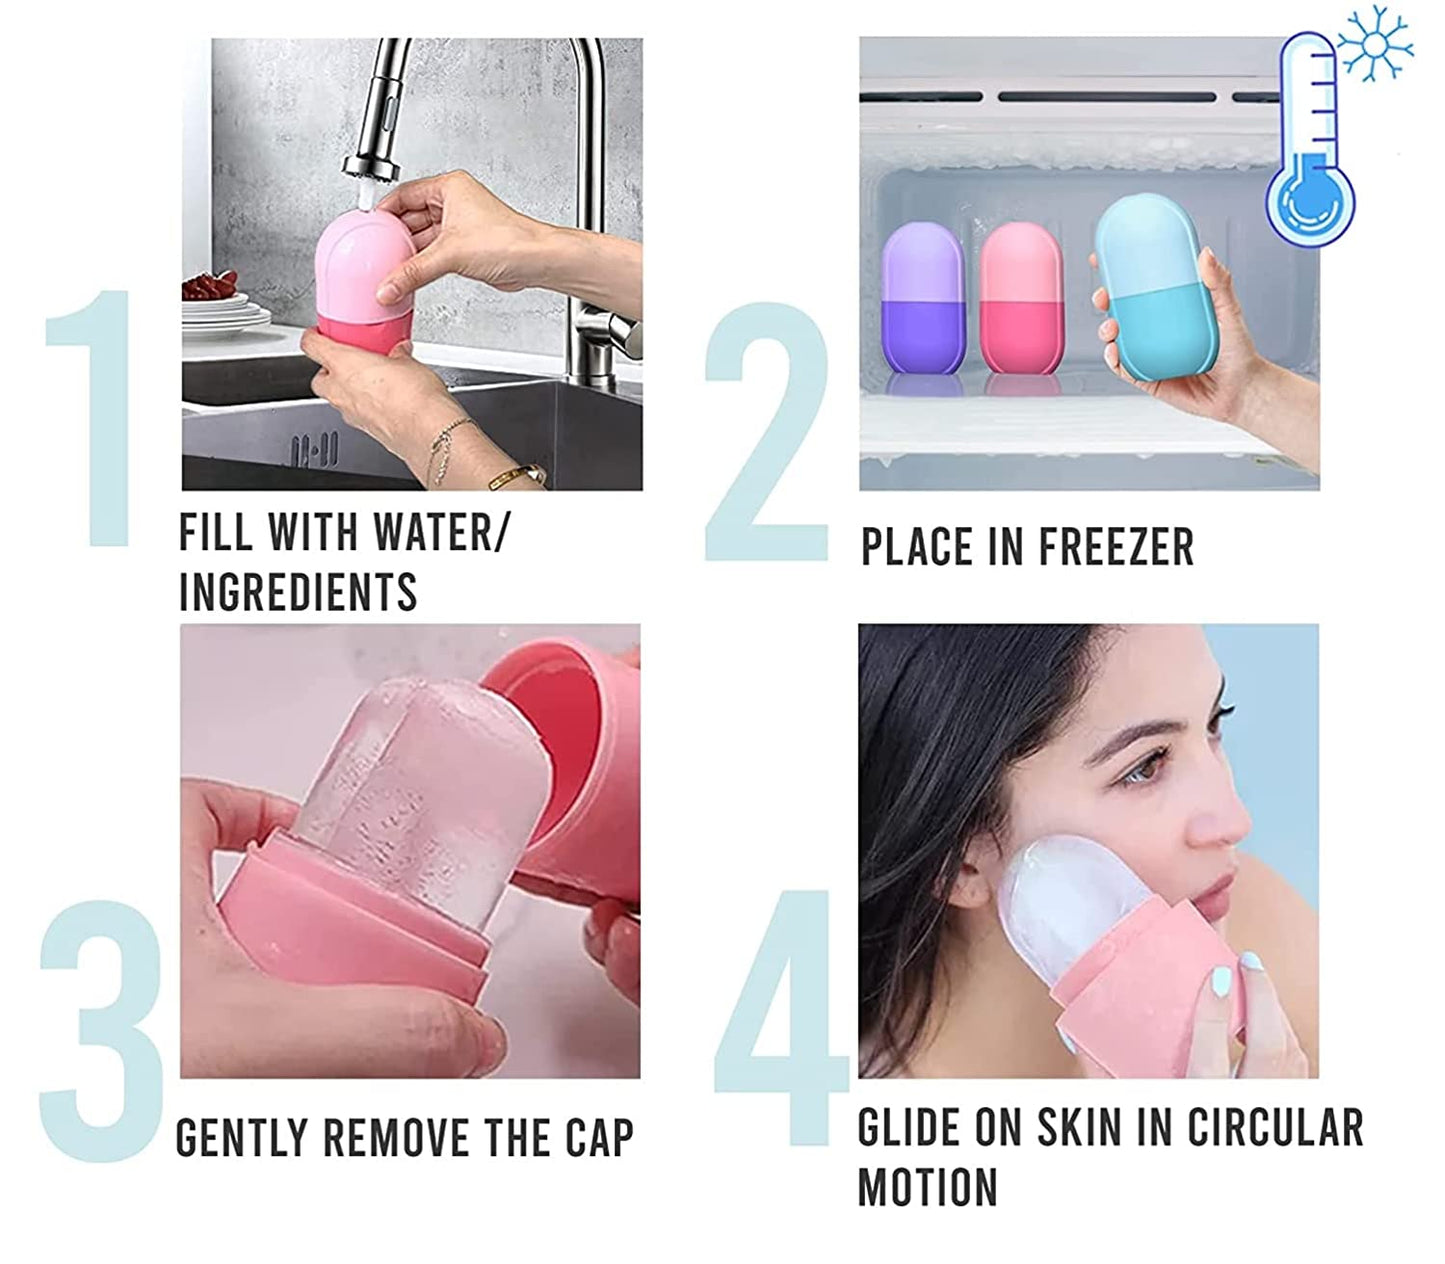 Face Ice Roller